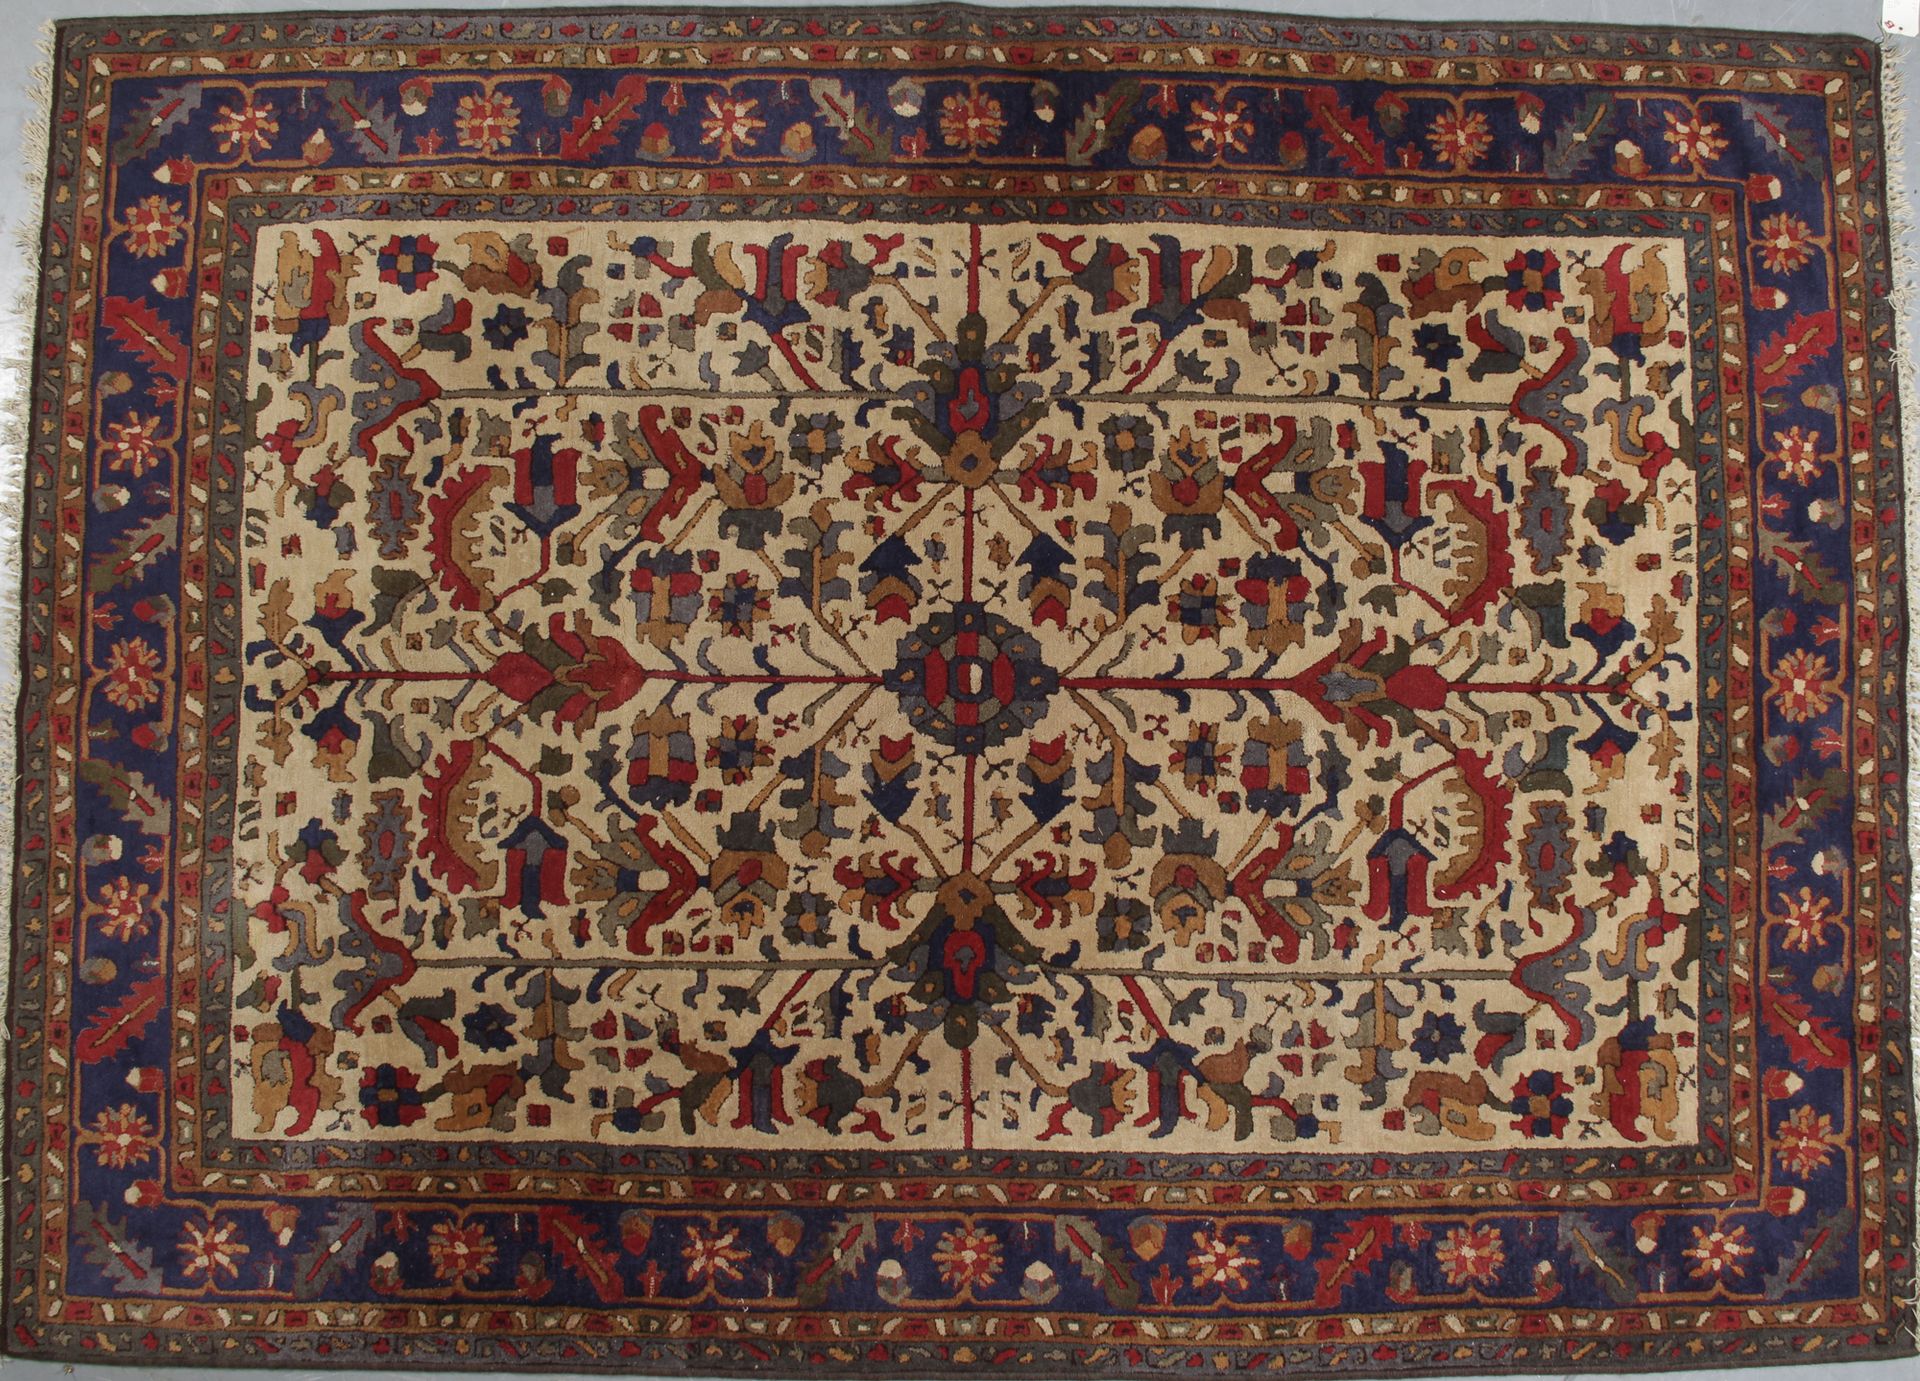 Null CARPET JANUS (France) around 1920.

Decorated with stylized garlands on a b&hellip;